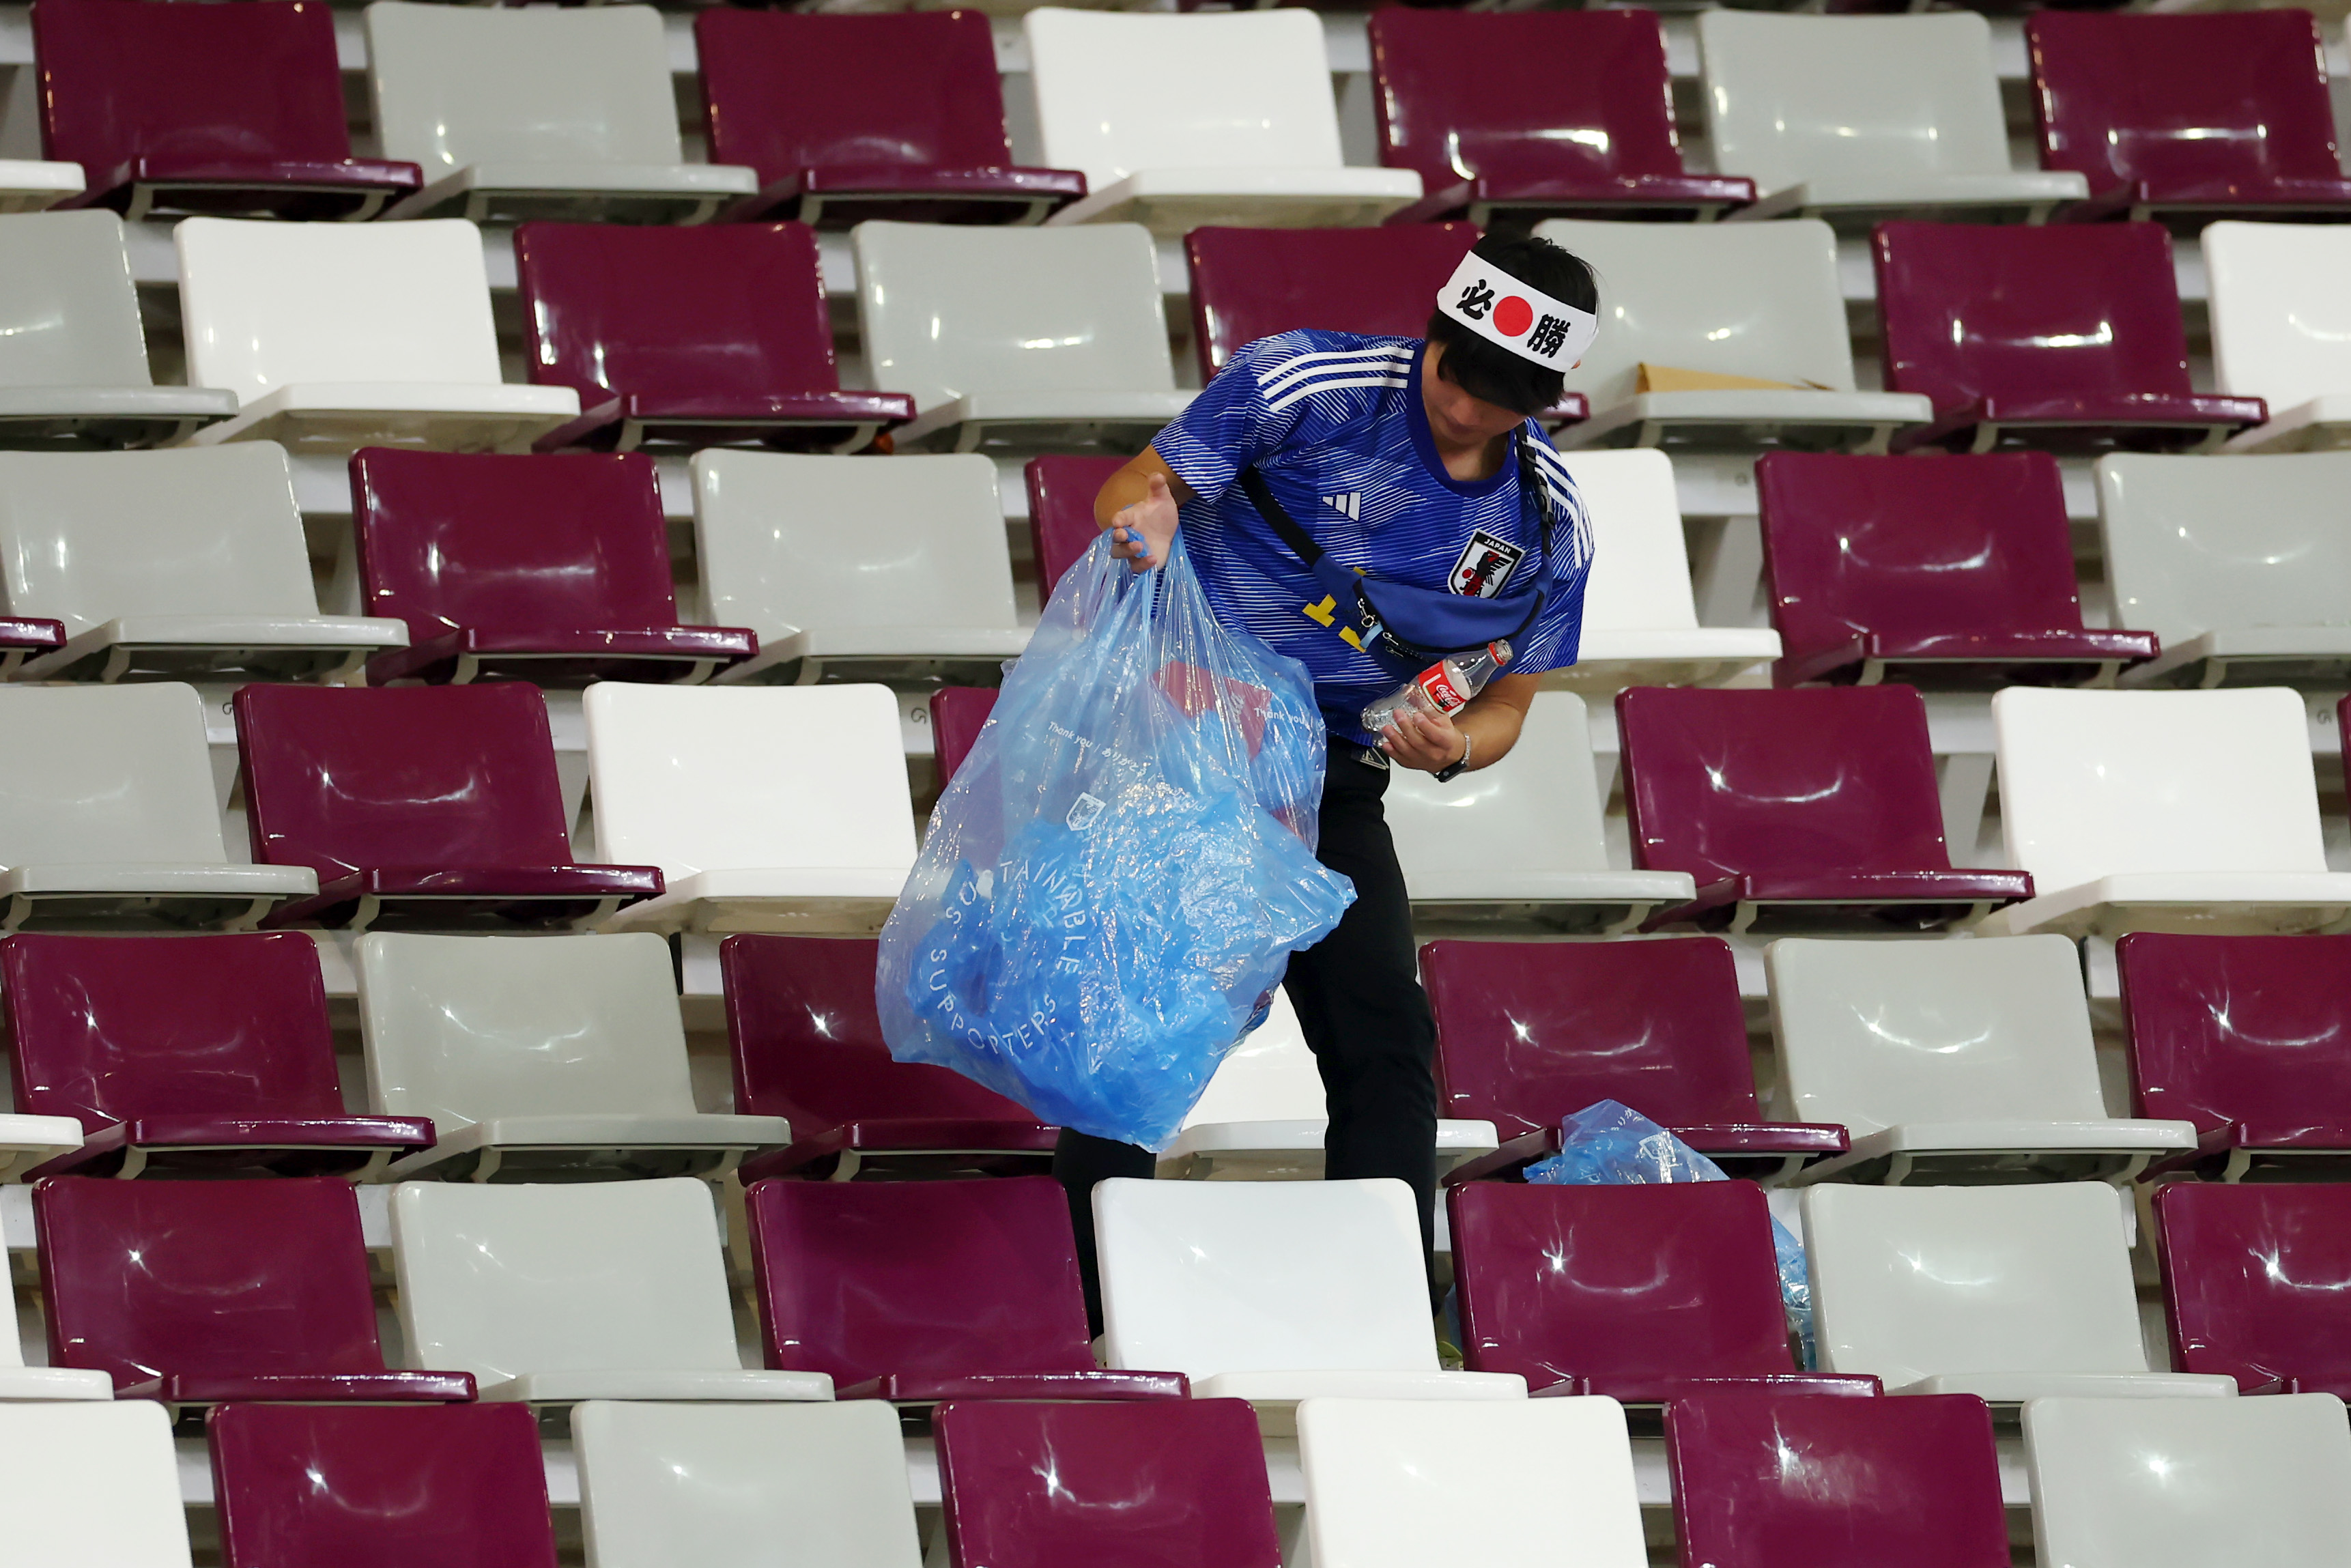 The fans took bags and collected all the waste from their sector of the stadium (Photo: Getty)